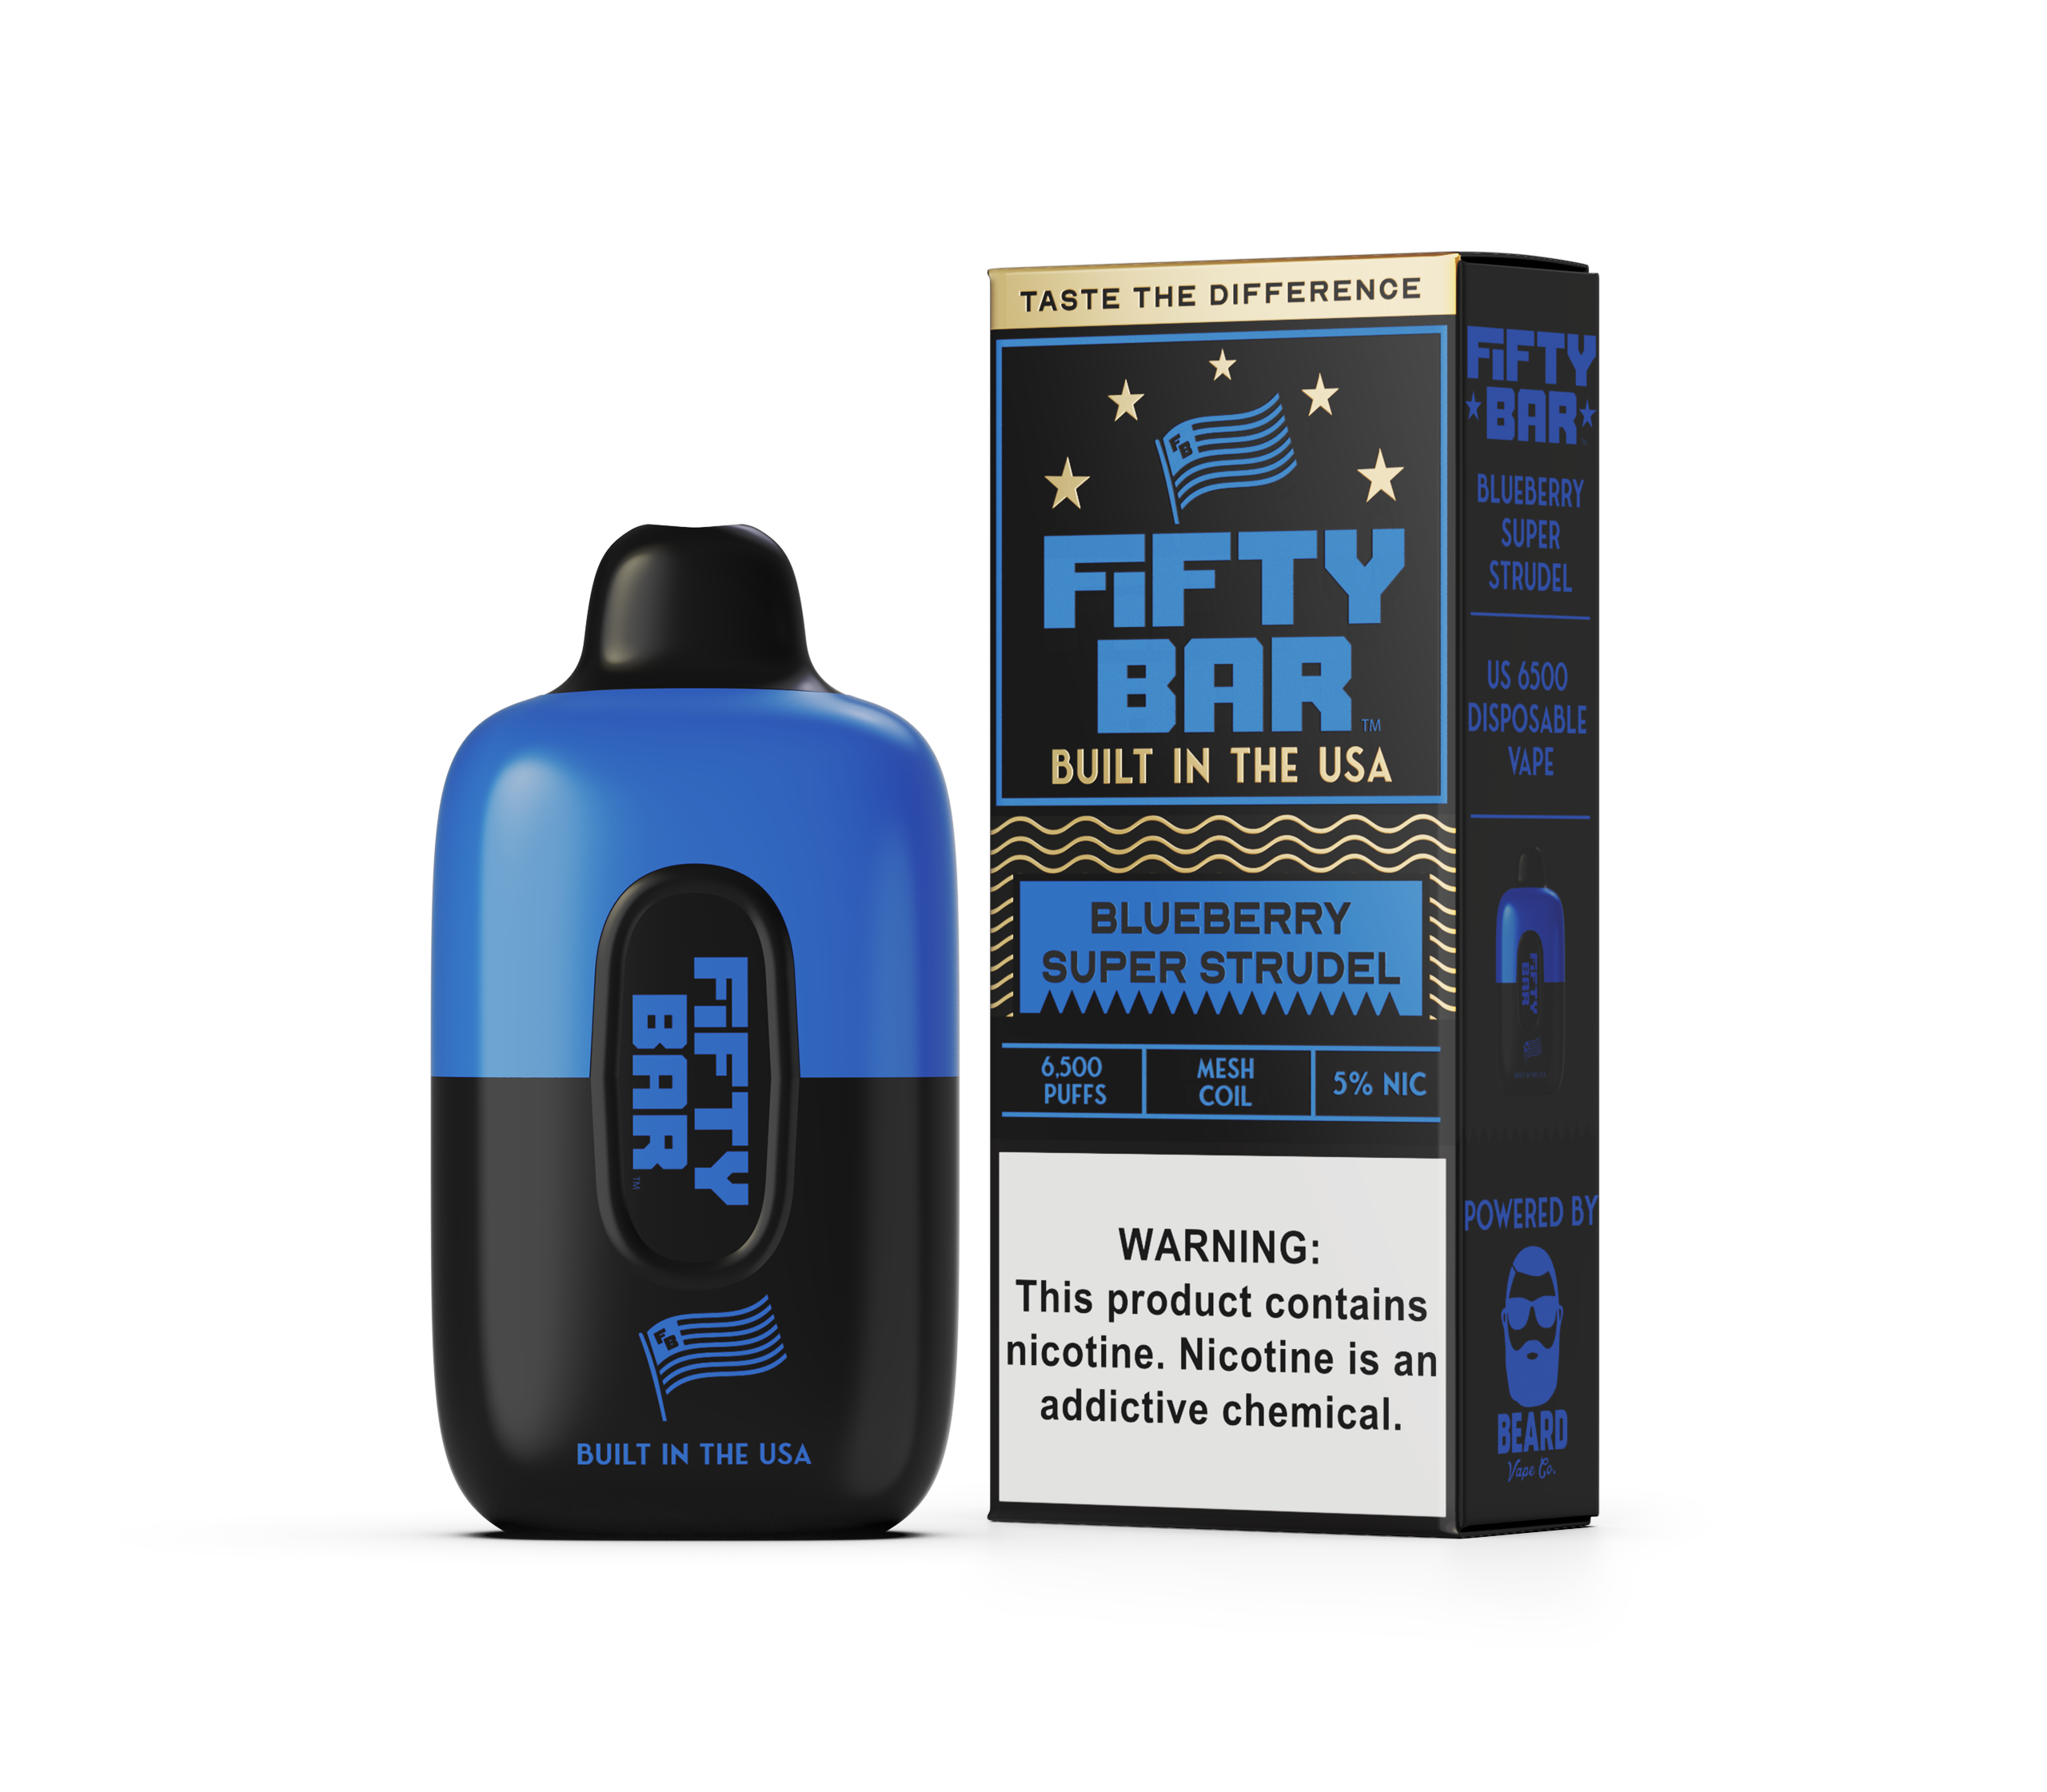 Fifty Bar 6500 Puff Rechargeable Vape Disposable 16mL Best Flavor Bluberry Super Strudel